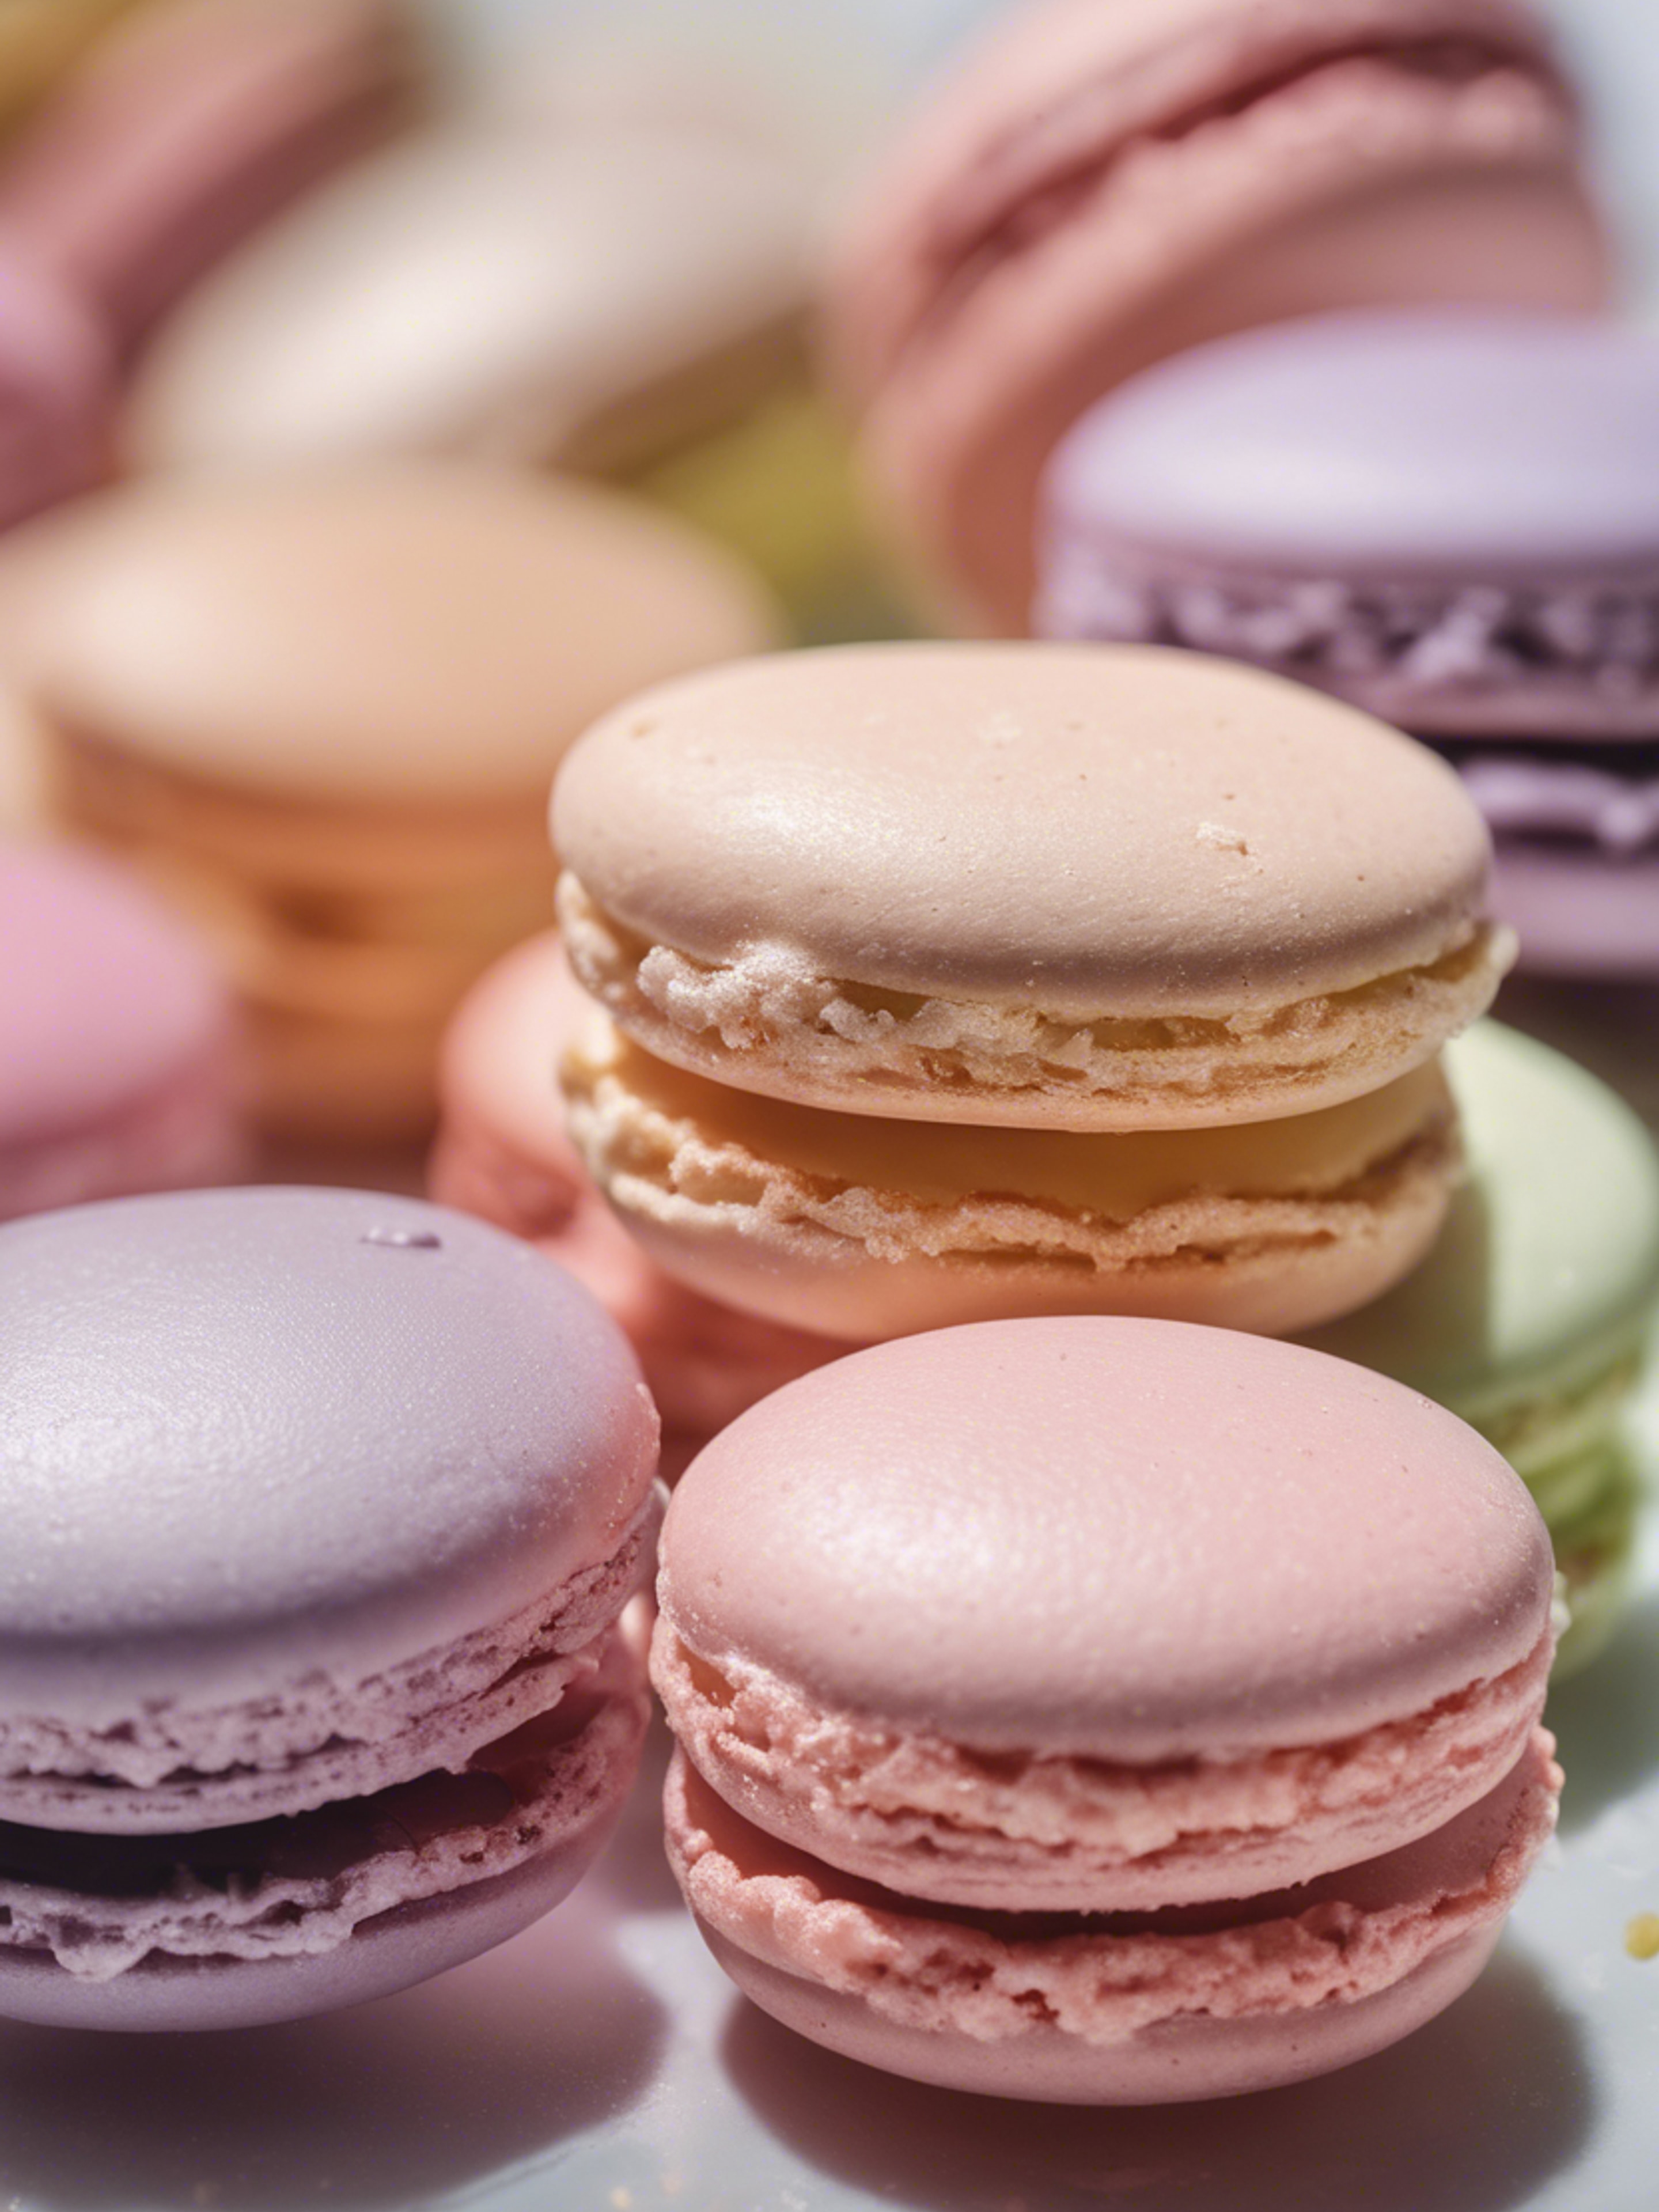 A close-up view of a cool pastel colored macaron making process. Wallpaper[347d58695ee94000a1fc]